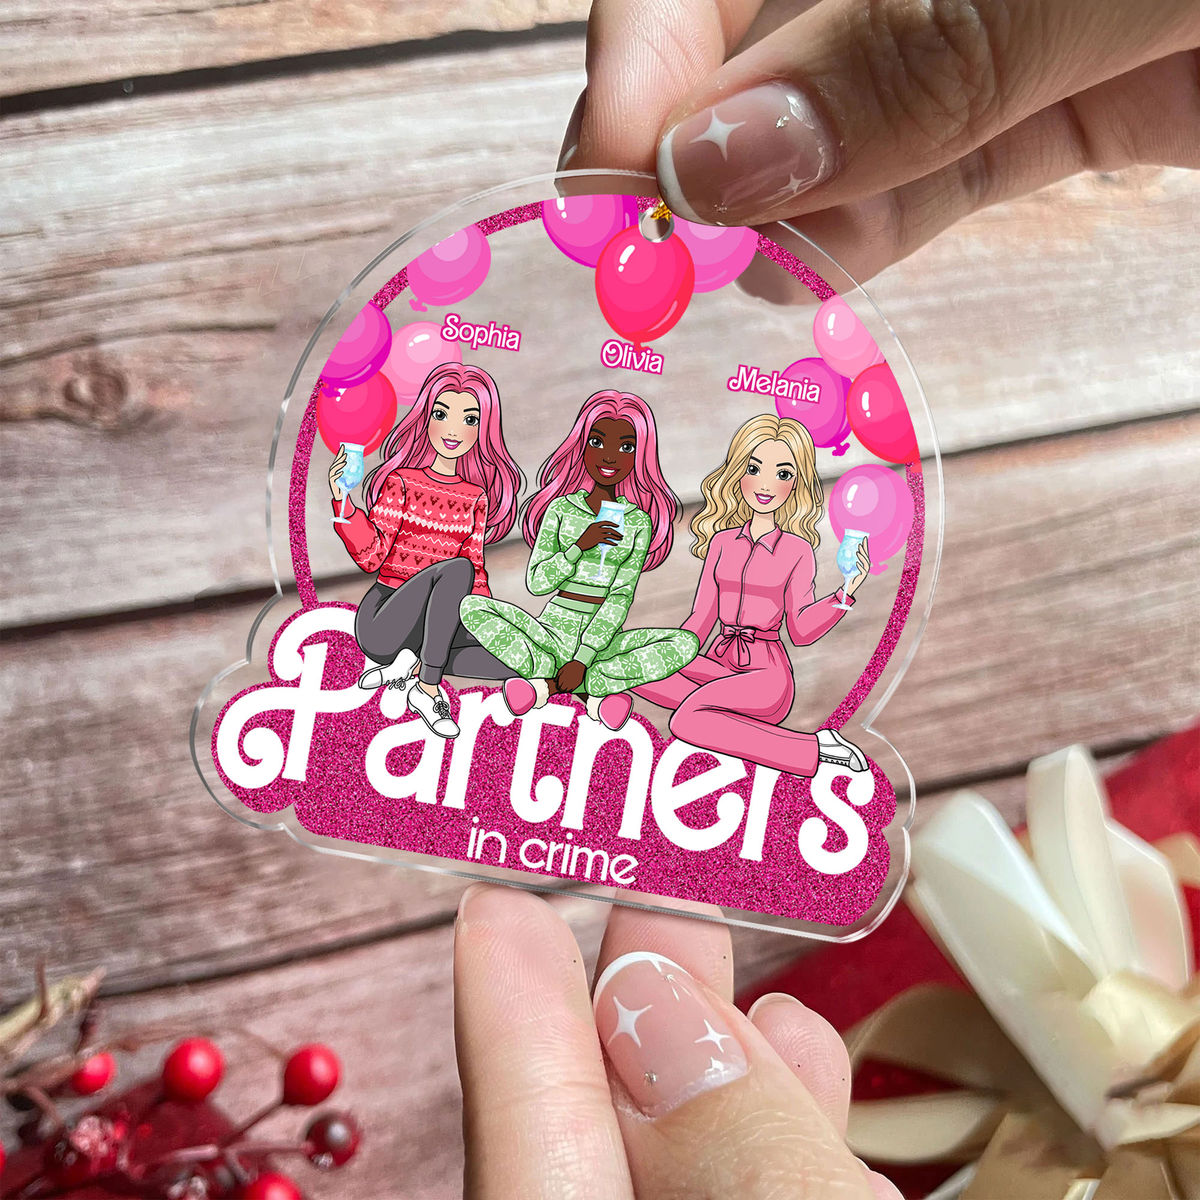 Personalized Pink Acrylic Friends Ornament - Partners In Crime - Playful Friendship Keepsake (v2)_4